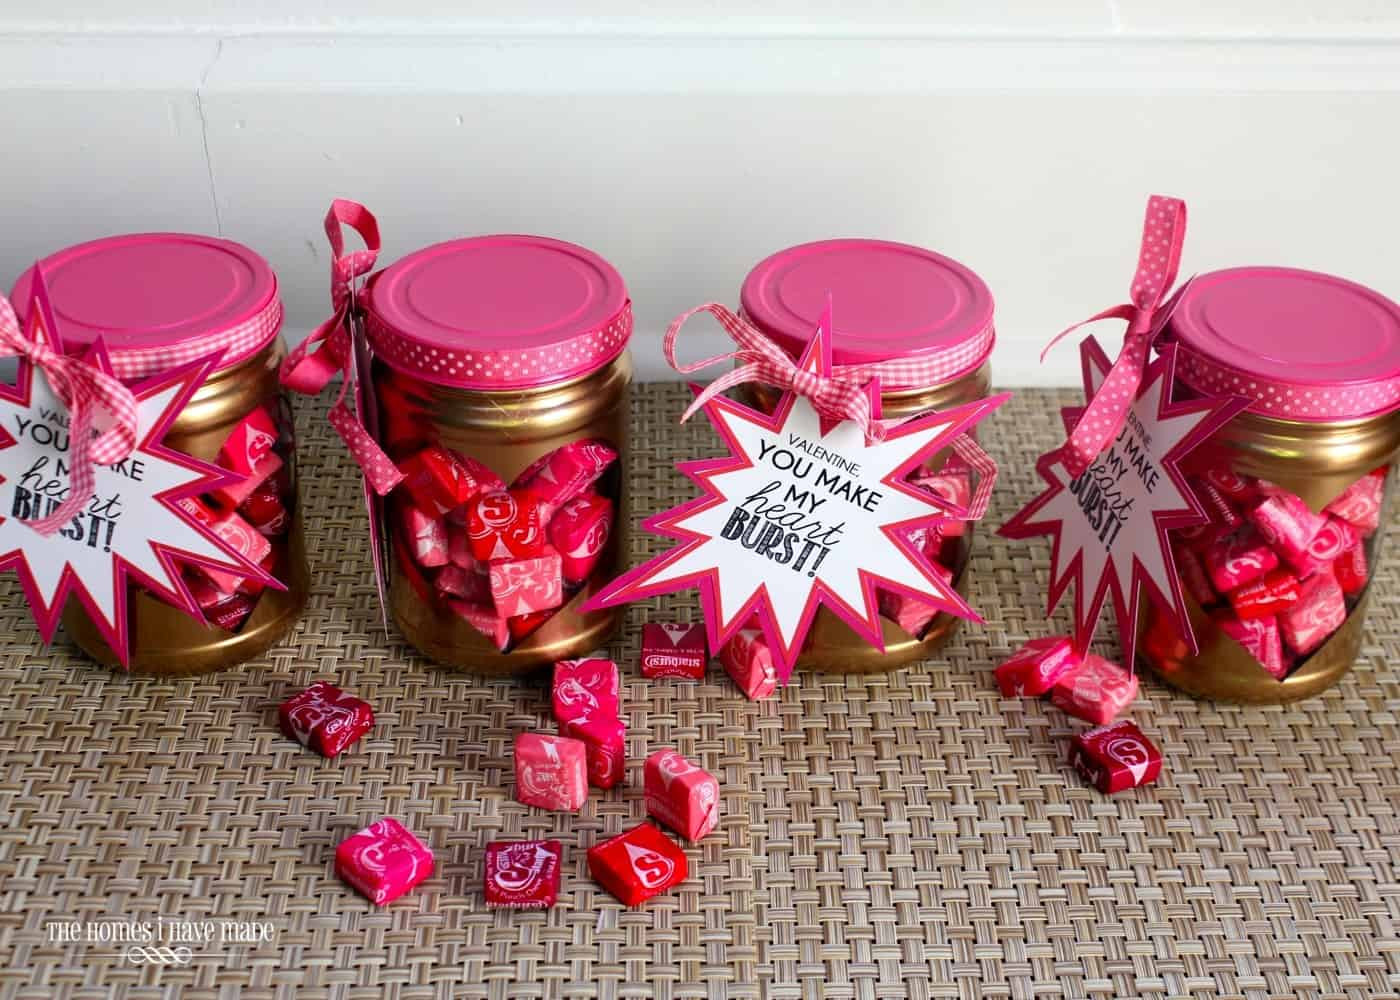 Valentines Gift Ideas For Teens
 10 Great Valentine s Gift Ideas for Teens and Tweens Mom 6